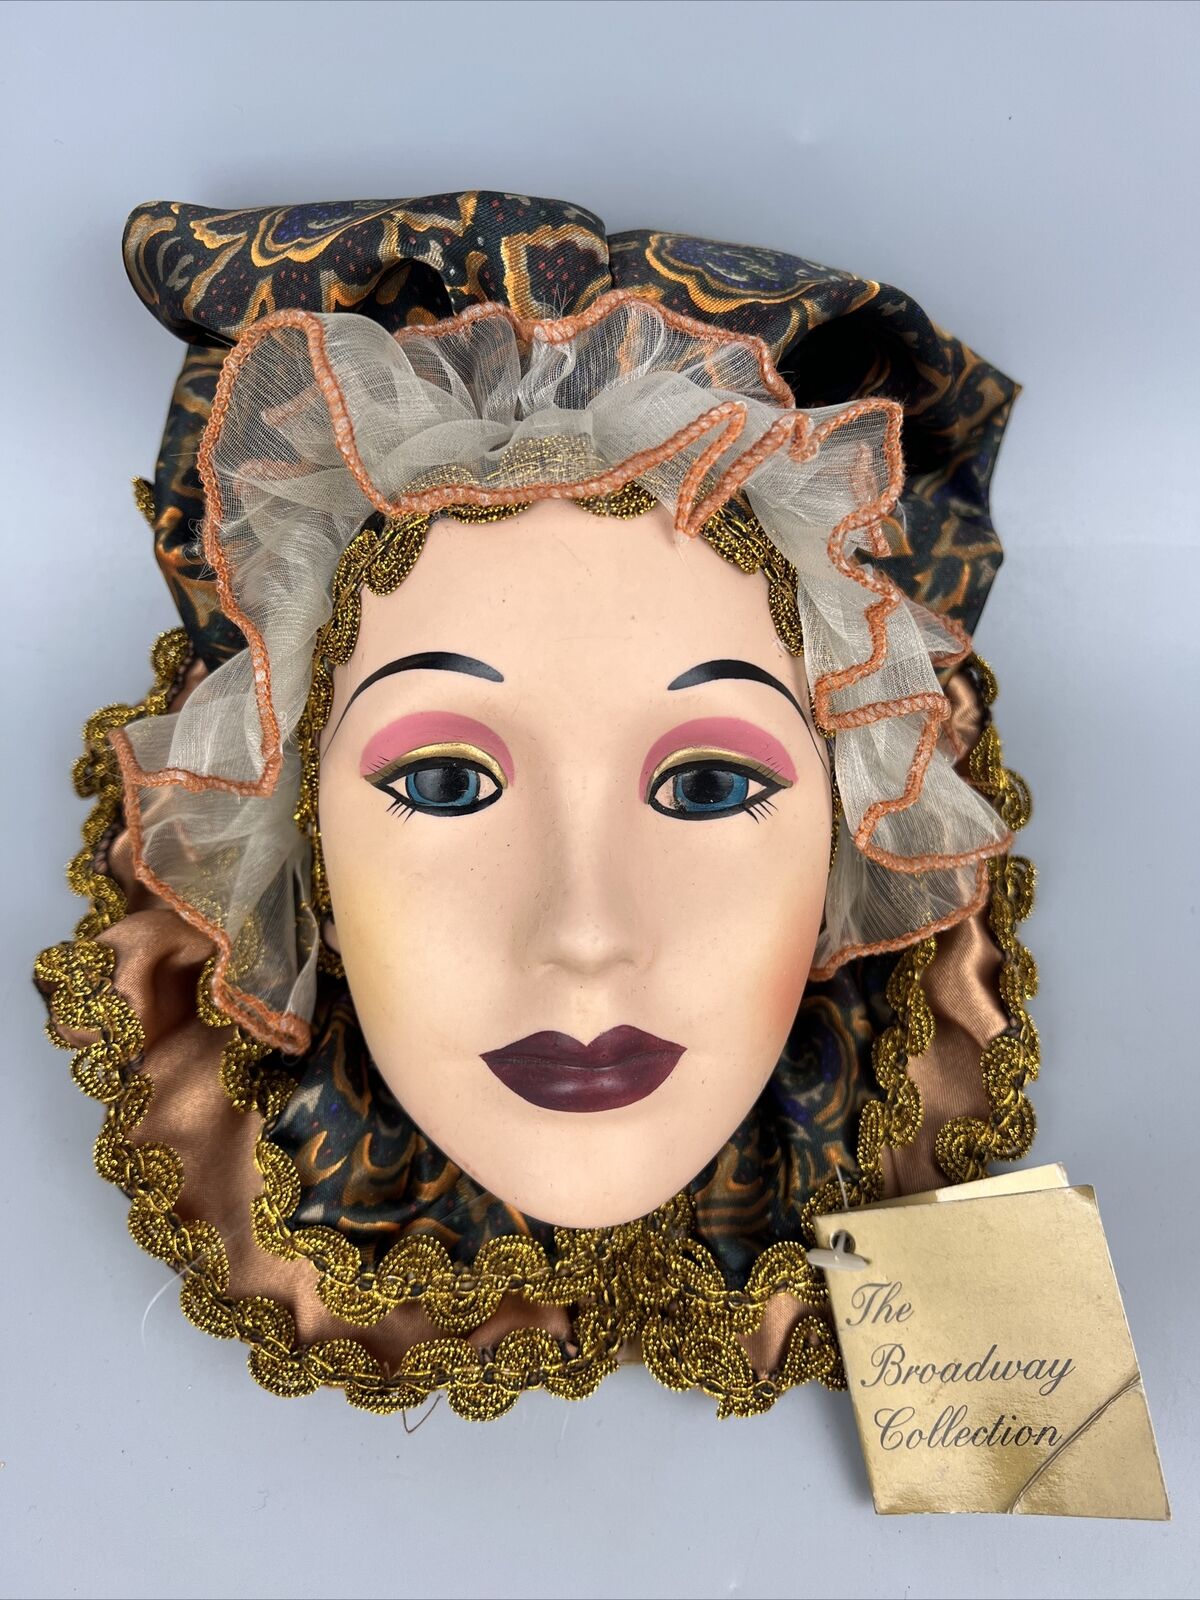 VTG The Broadway Collection Hand Painted Porcelain Woman’s Face Mask Wall Decor